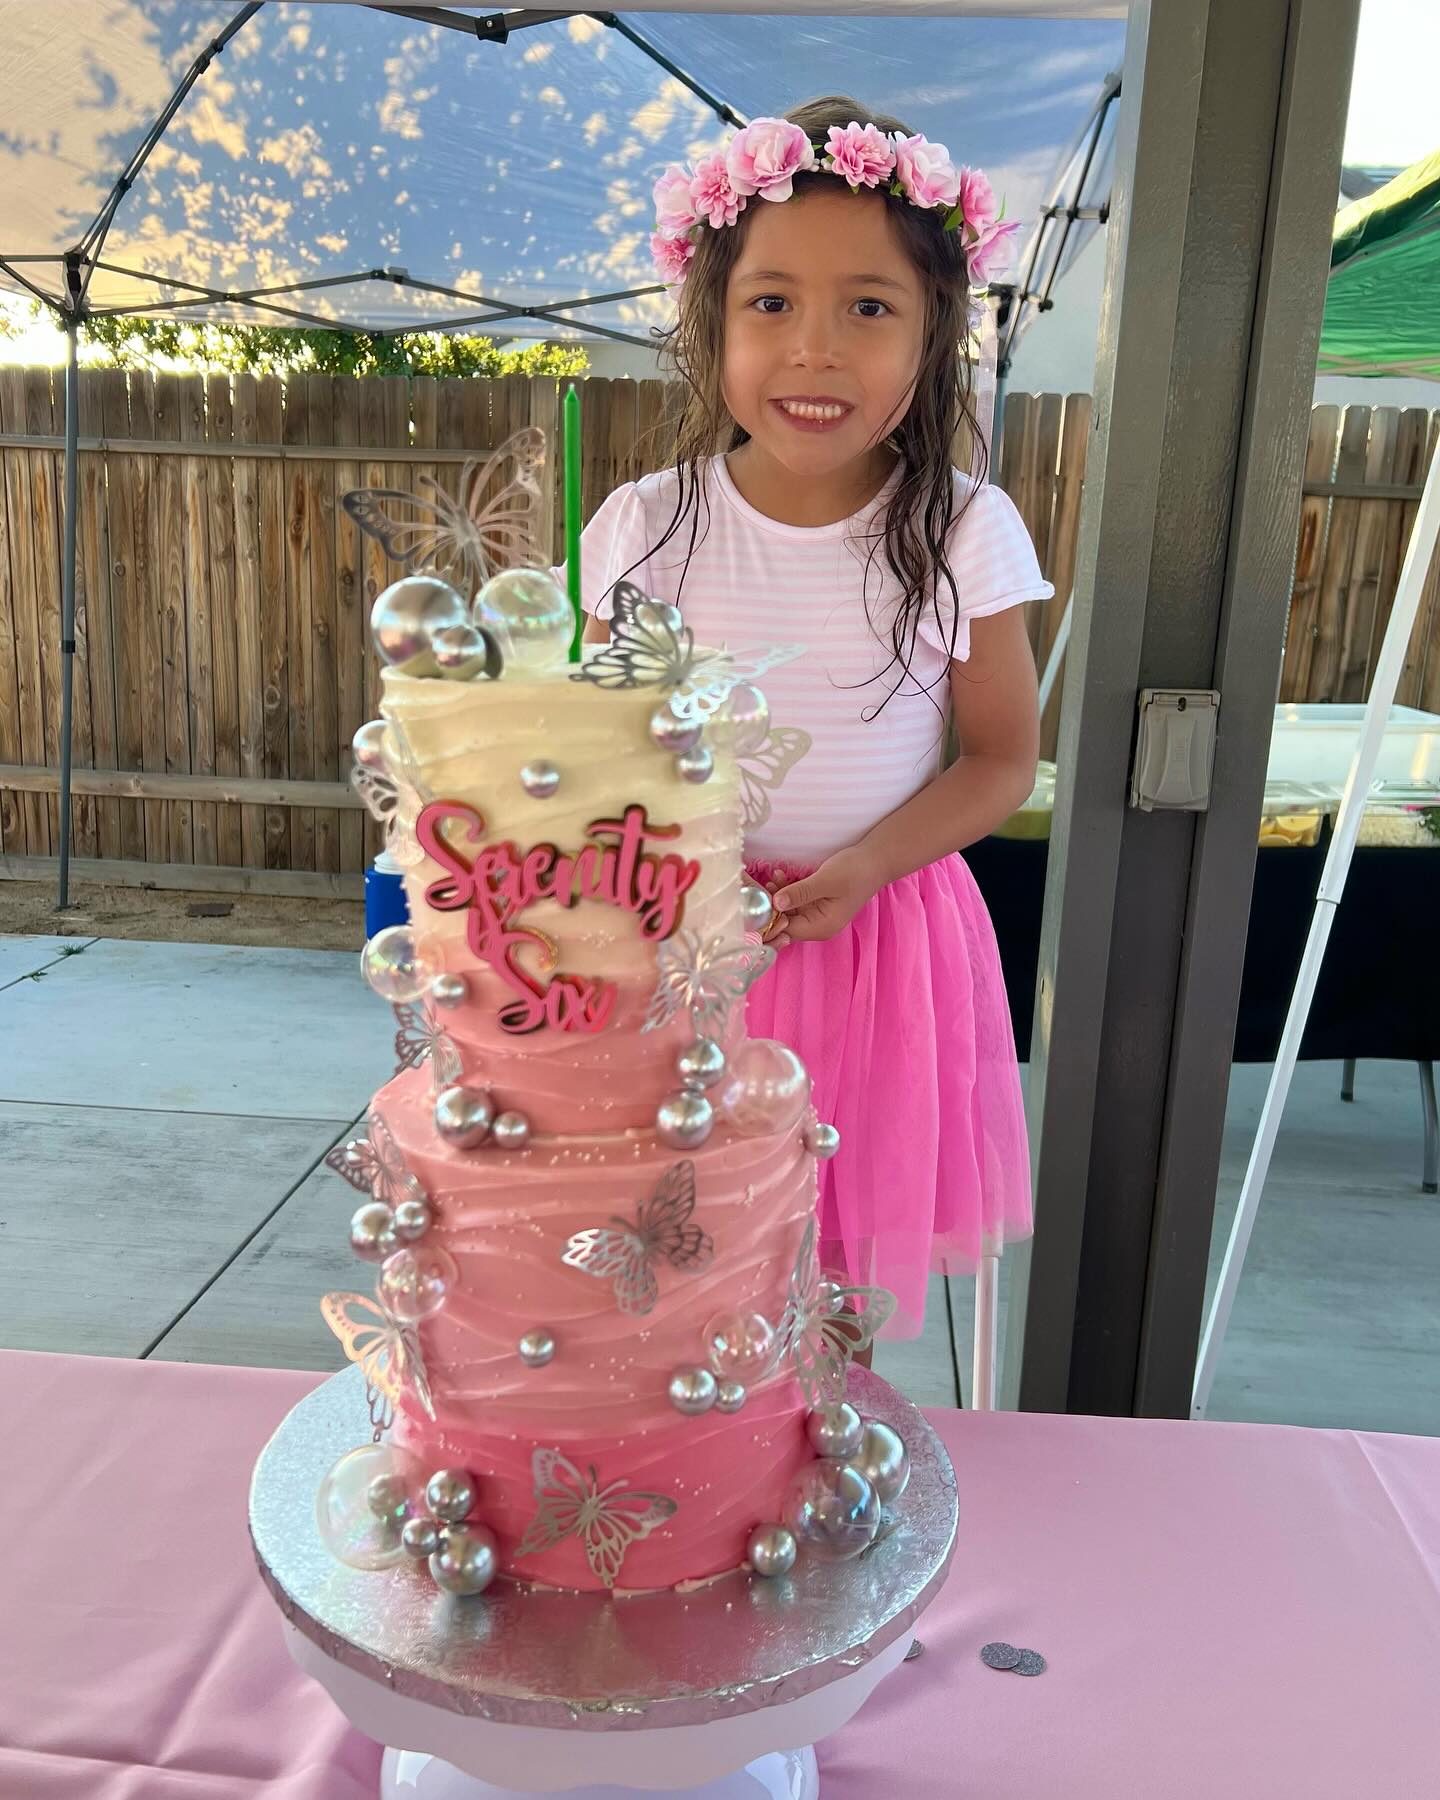 Serenity’s 6th Birthday💗 baby girls deserves the world and we will make sure she gets it💞